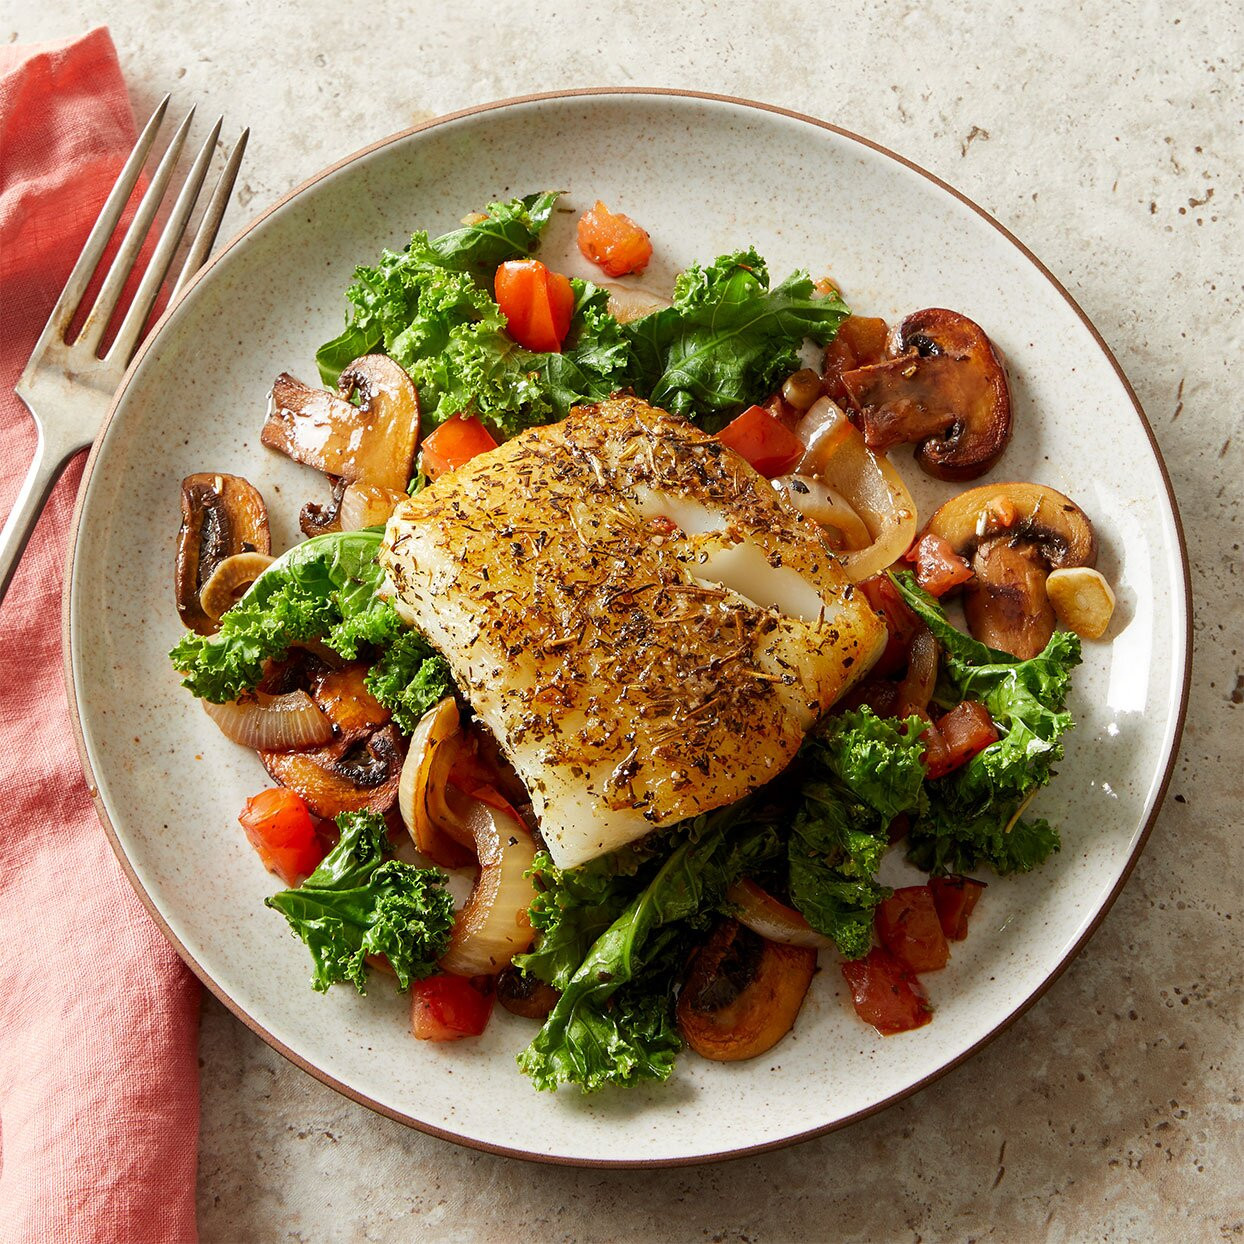 Fish And Mushrooms Recipes
 Herby Mediterranean Fish with Wilted Greens & Mushrooms